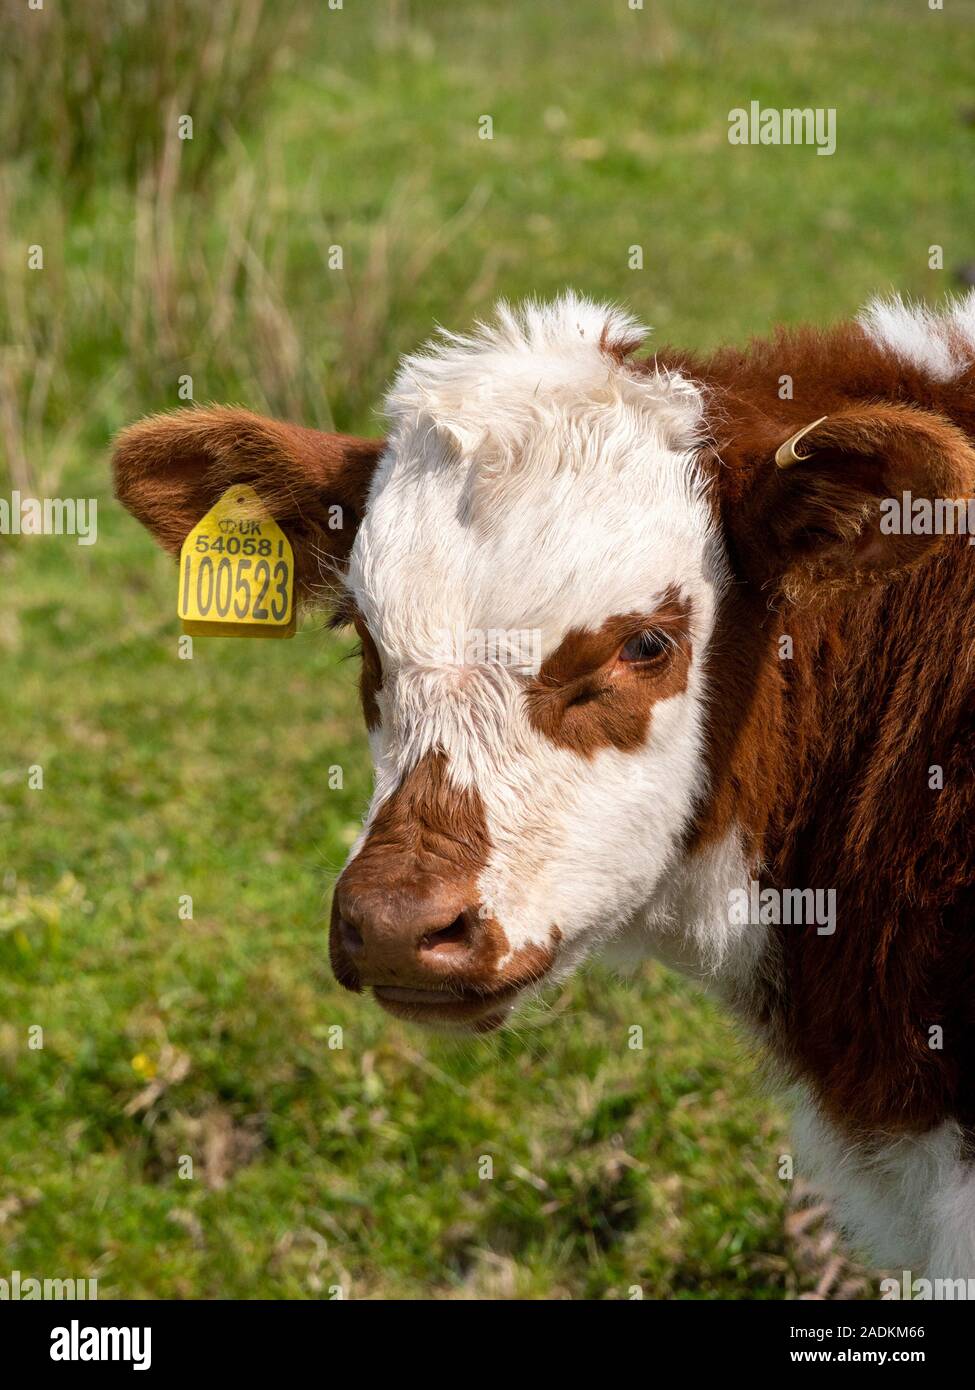 Young calf with brown and white coat and yellow ear tags, Isle of Colonsay, Scotland, UK Stock Photo